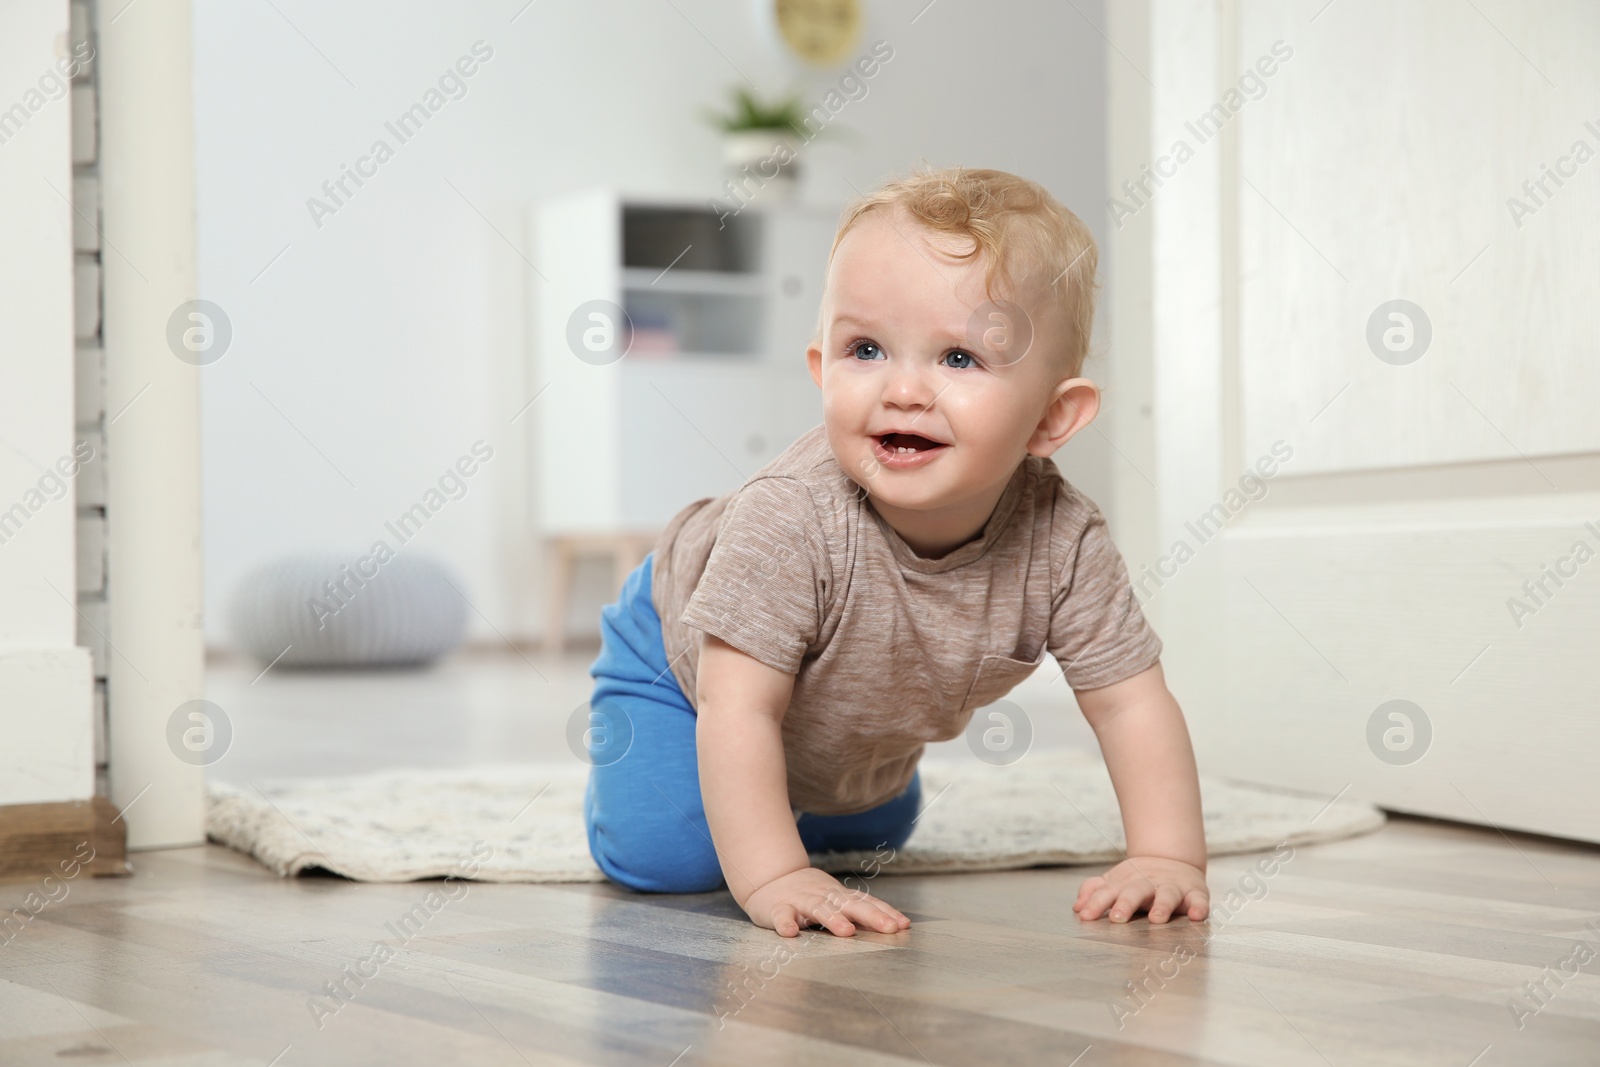 Photo of Cute little baby crawling on floor indoors